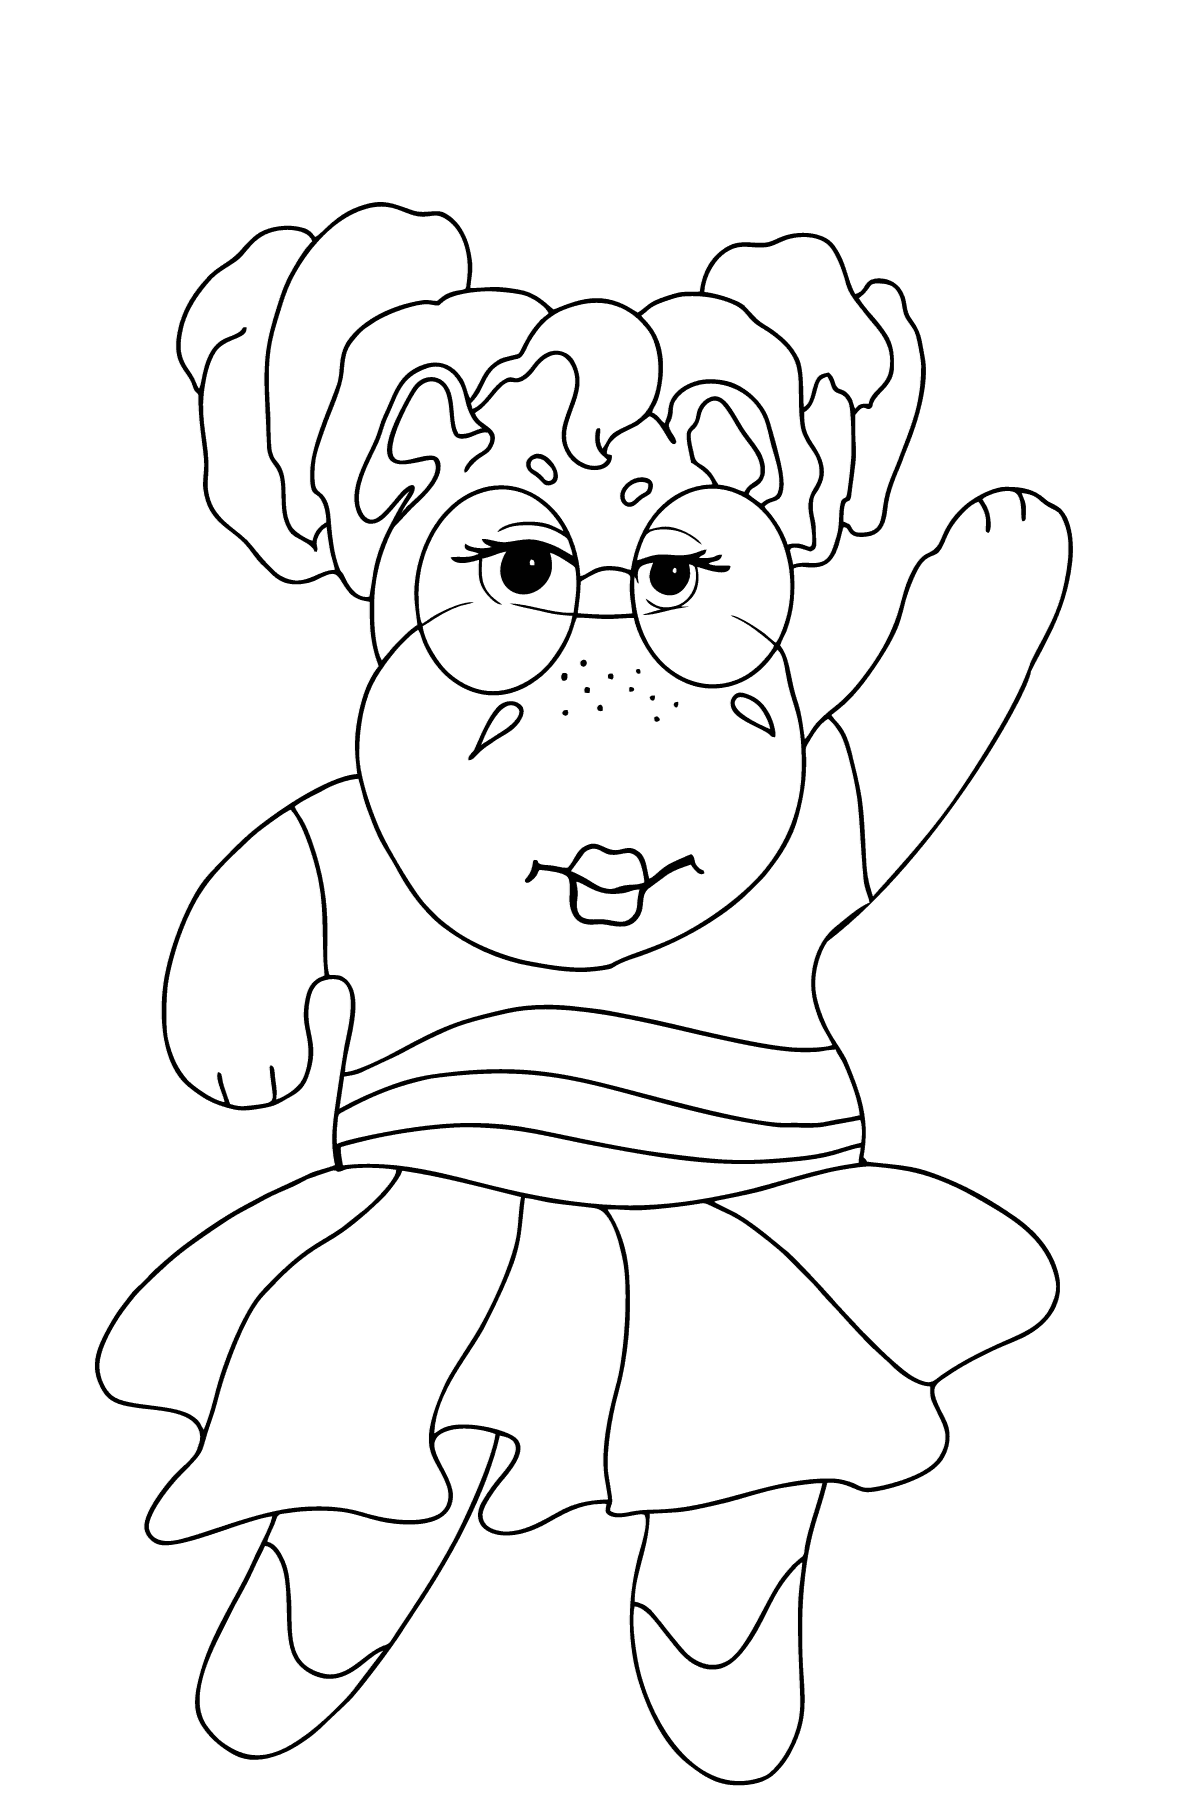 Coloring Page - A Hippo in Sunglasses for Children 